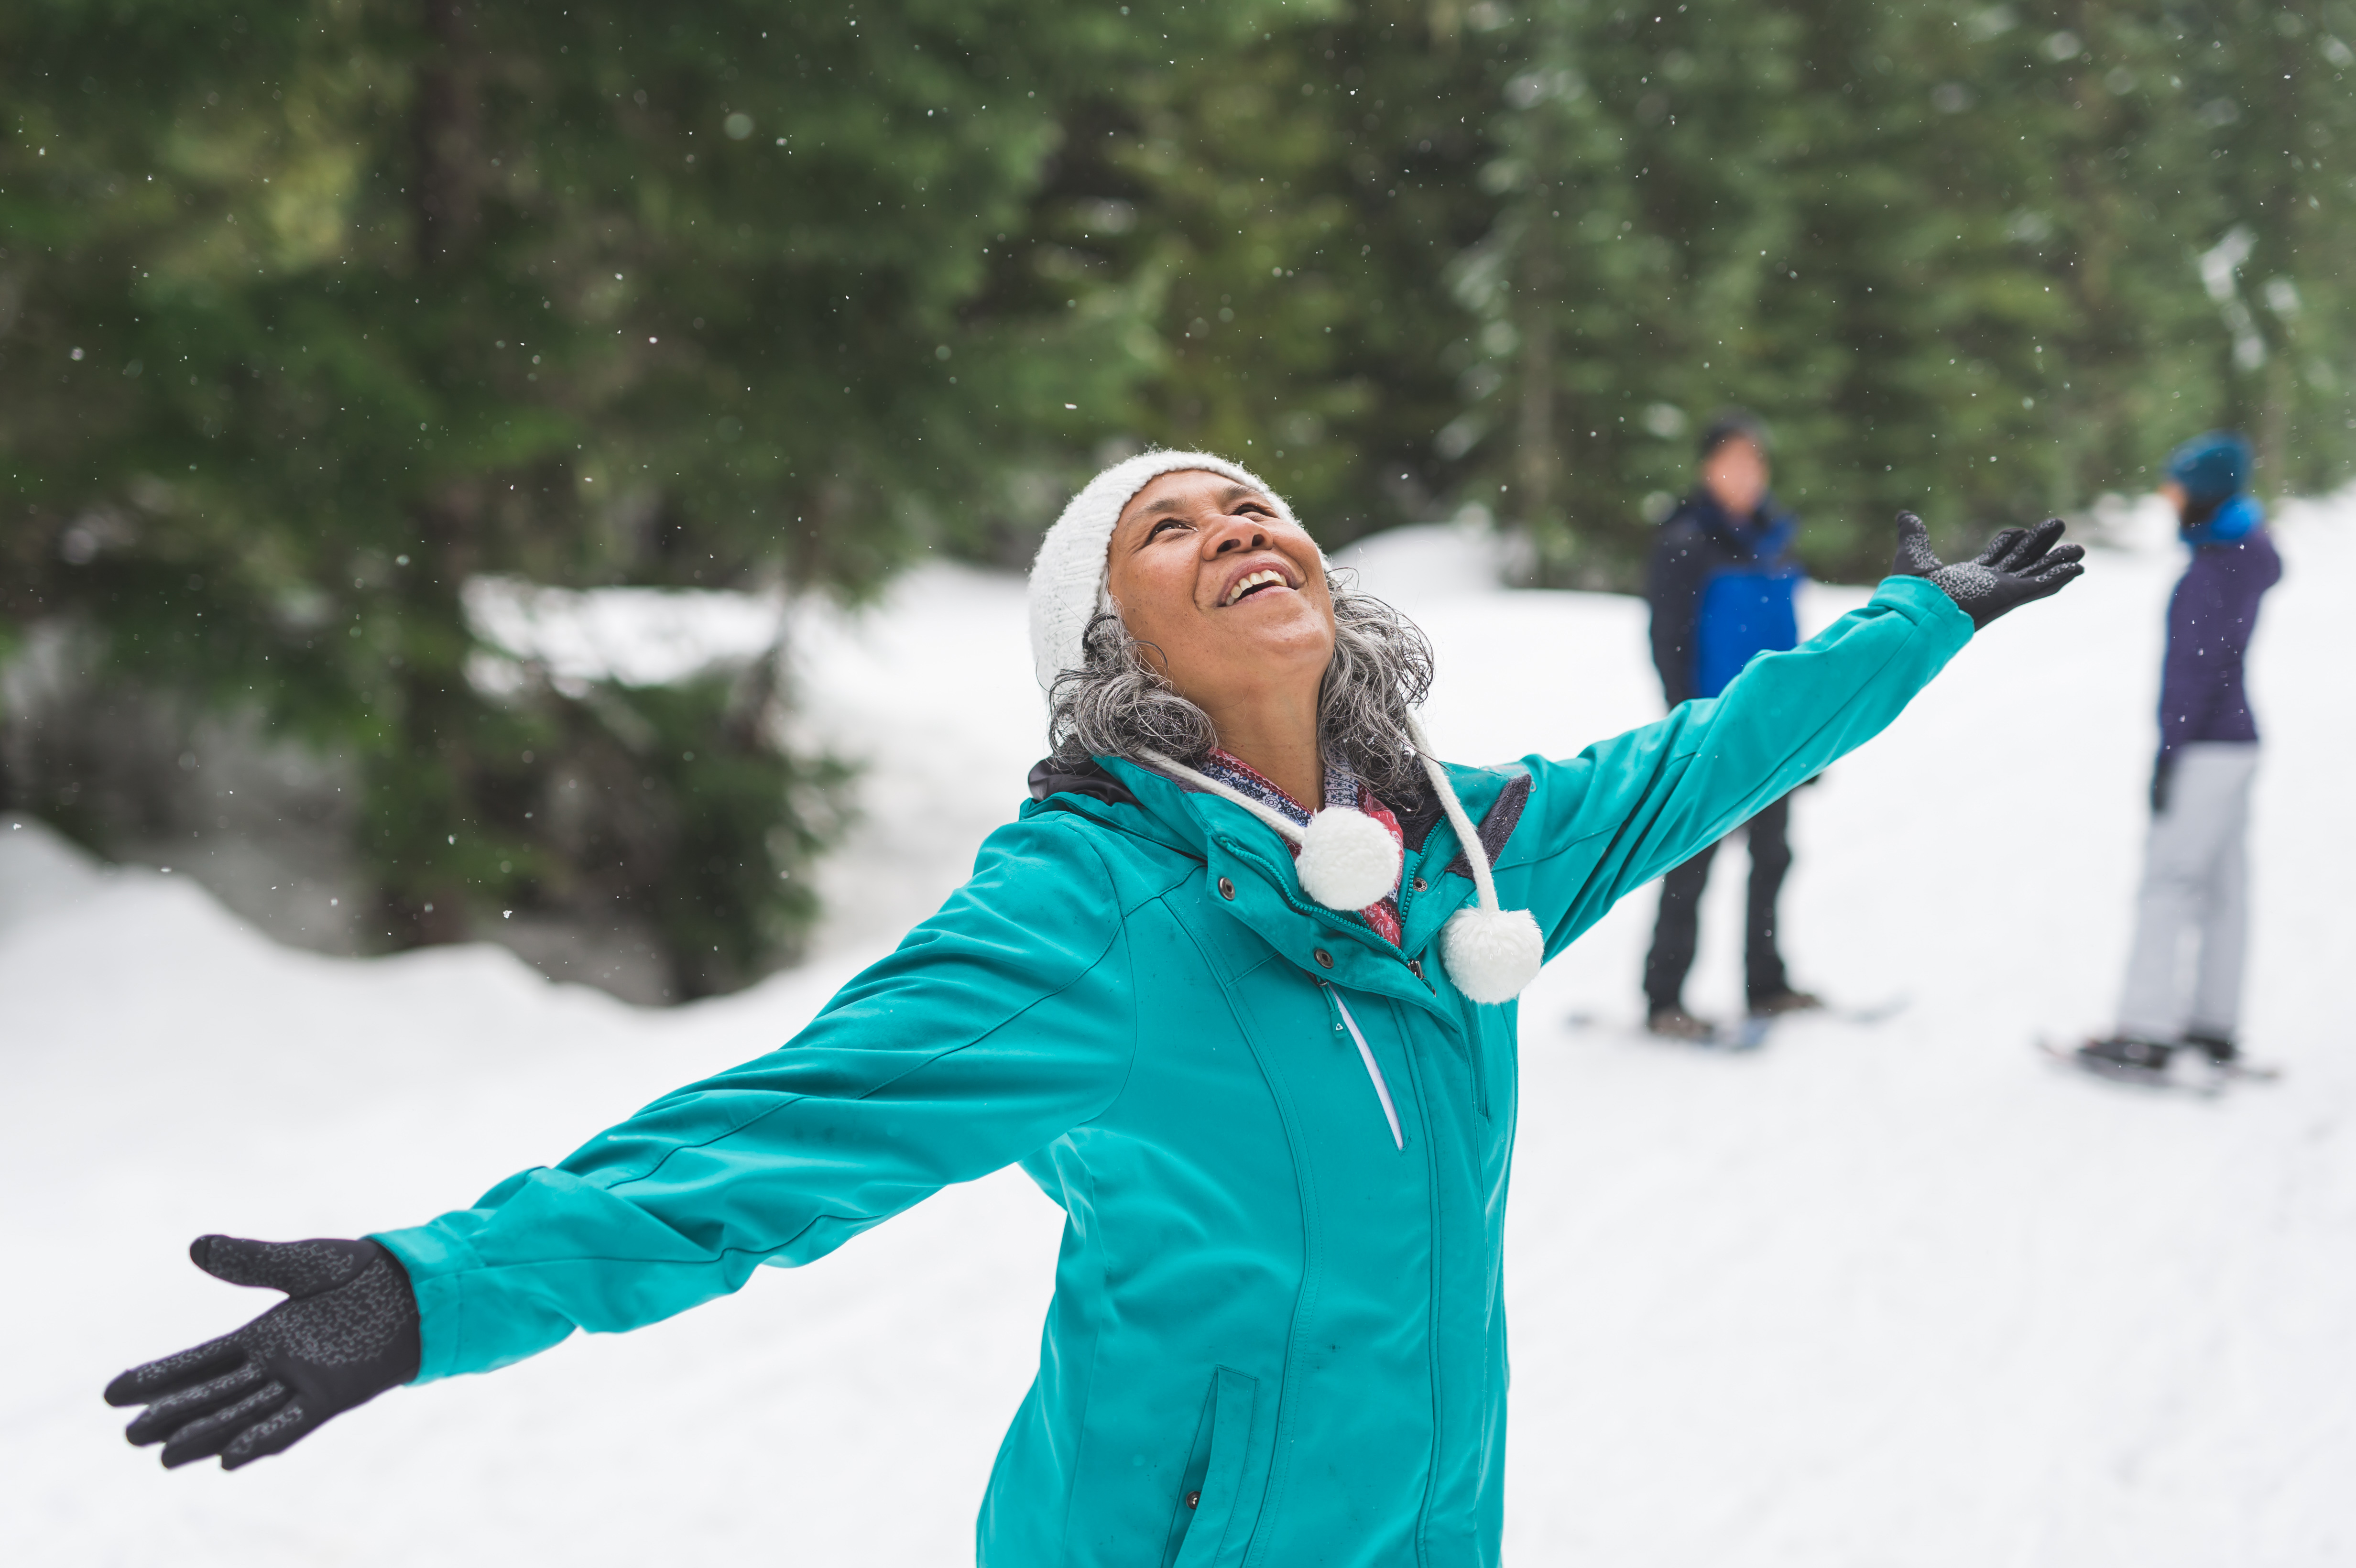 Older woman playing in the snow while a couple look on in the background